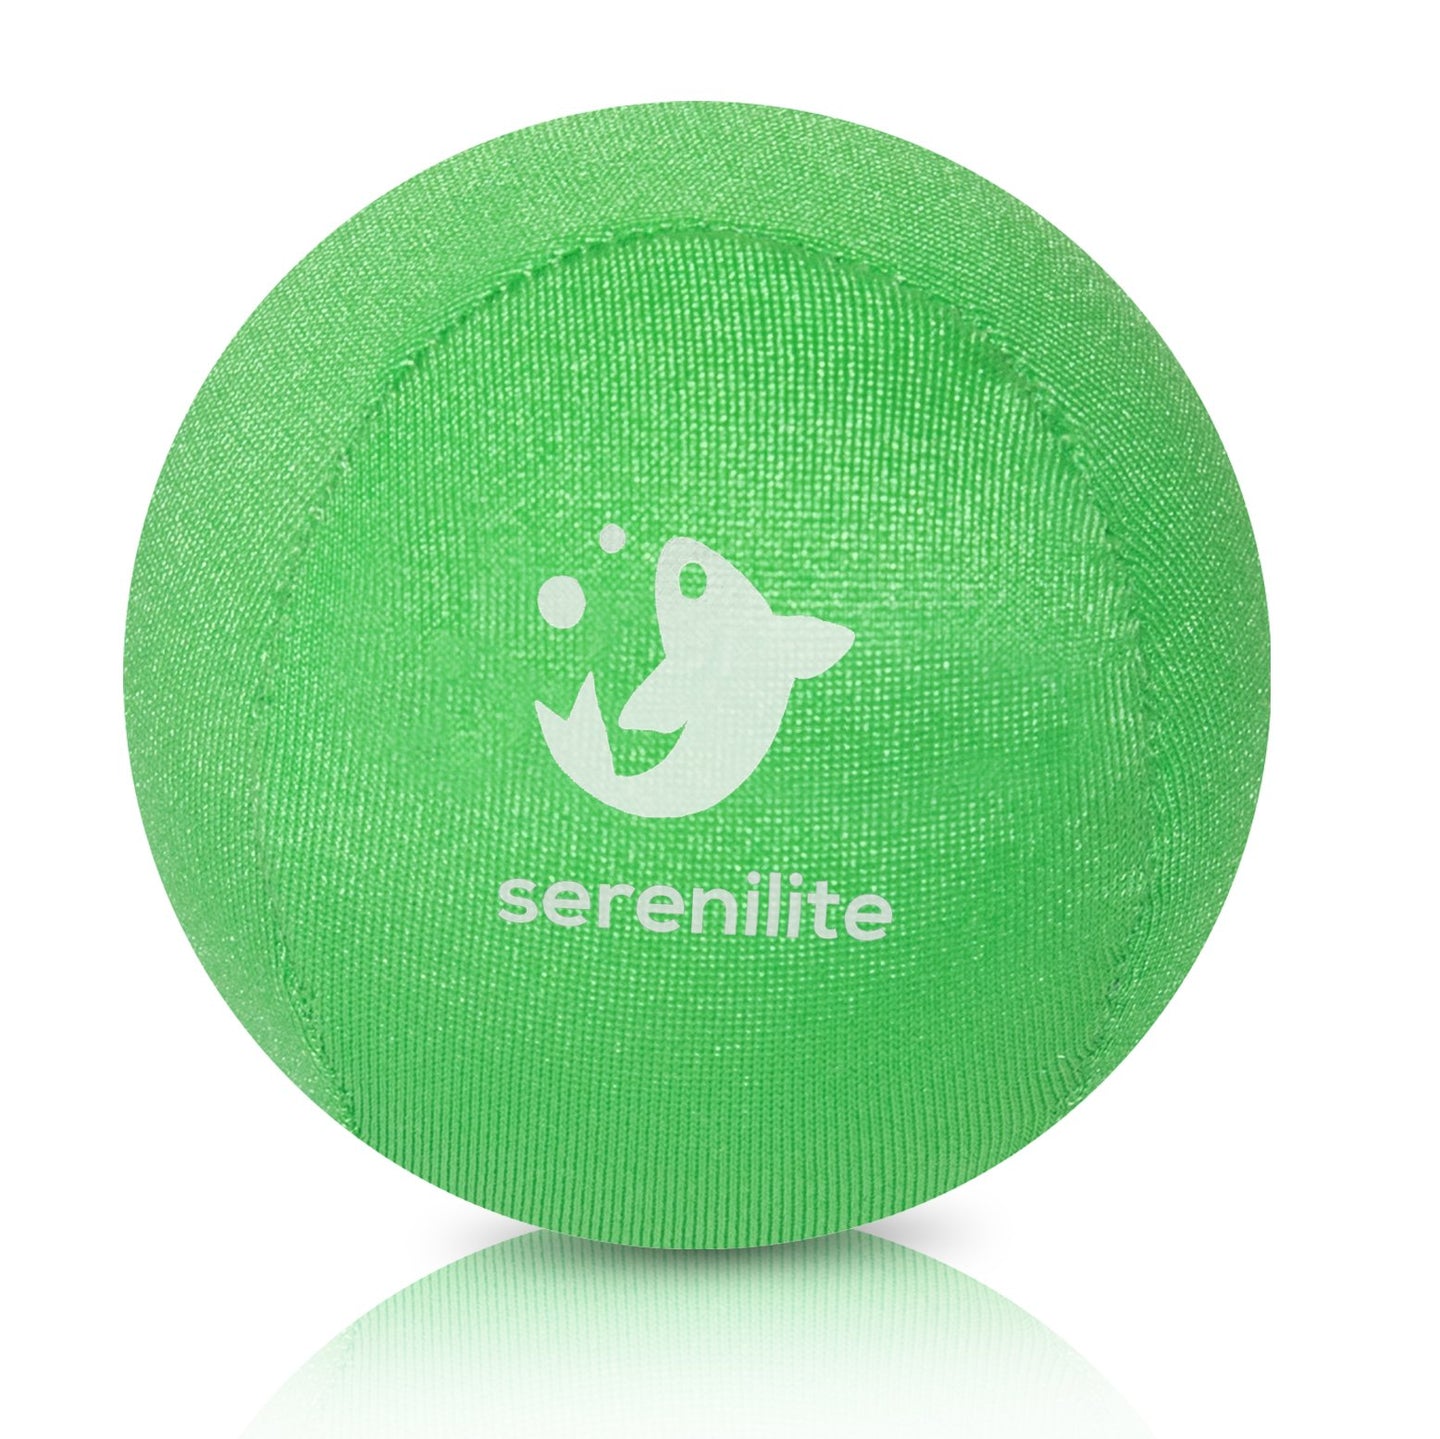 Serenilite Hand Therapy Stress Ball - Stress & Anxiety Relief - Kiwi